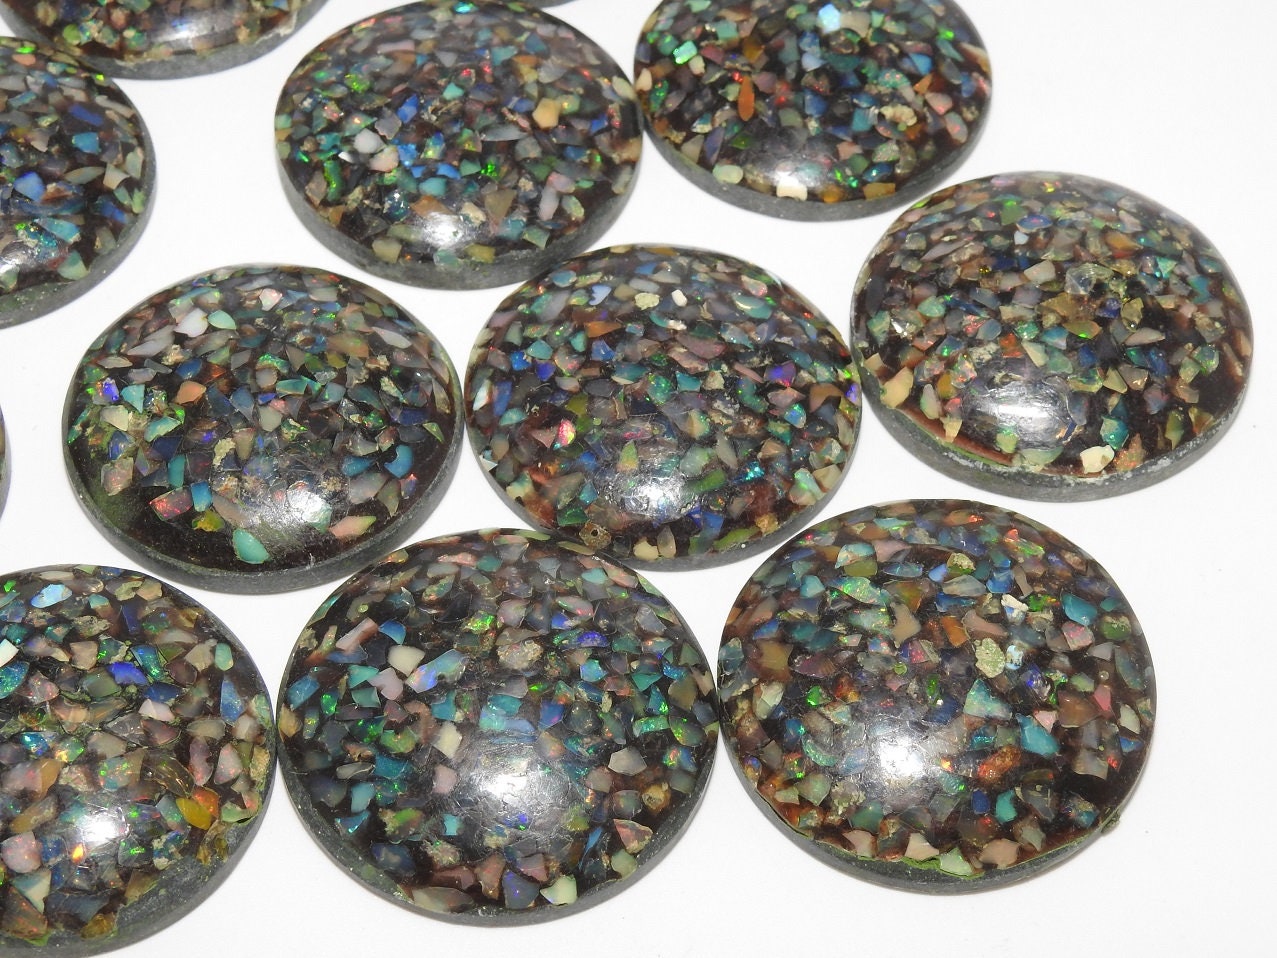 Ethiopian Black Opal Smooth Round Shape Cabochon,Multi Flashy Fire,Stabilized Gemstone,Loose Stone,For Making Jewelry,37X37MM (wm)EO2 | Save 33% - Rajasthan Living 15